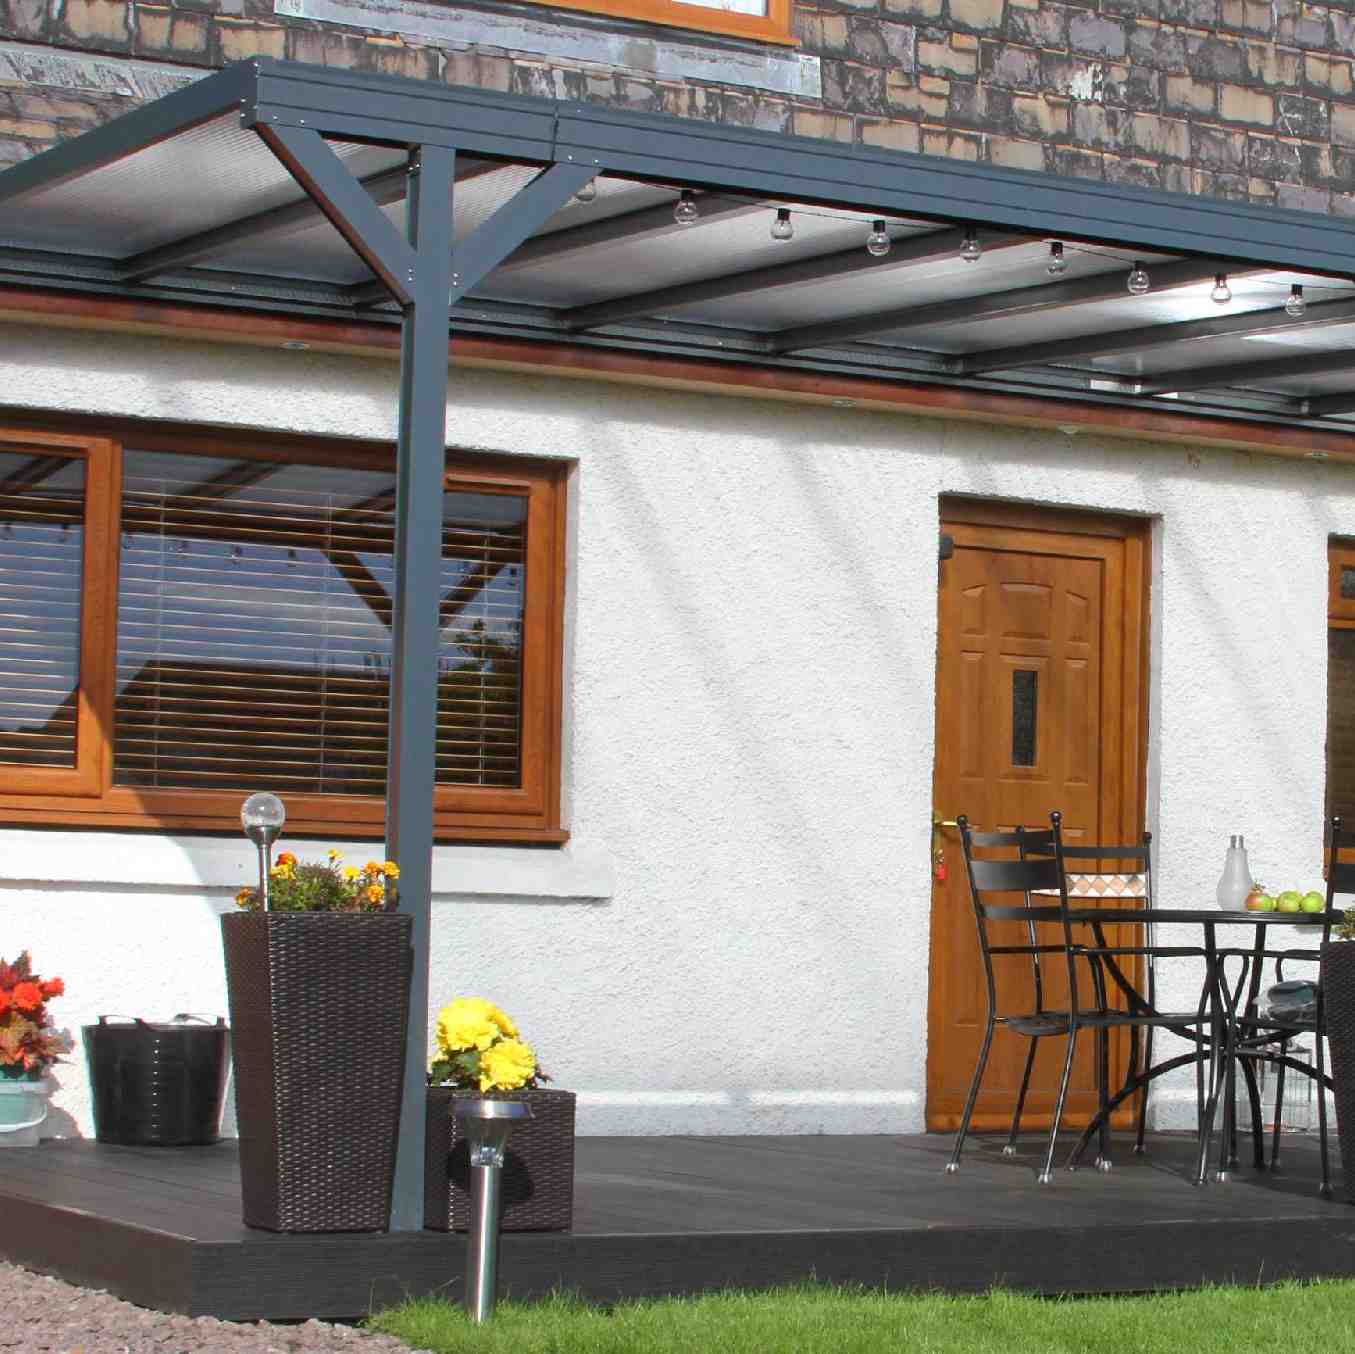 Omega Verandah, Anthracite Grey, 16mm Polycarbonate Glazing - 8.0m (W) x 4.5m (P), (4) Supporting Posts